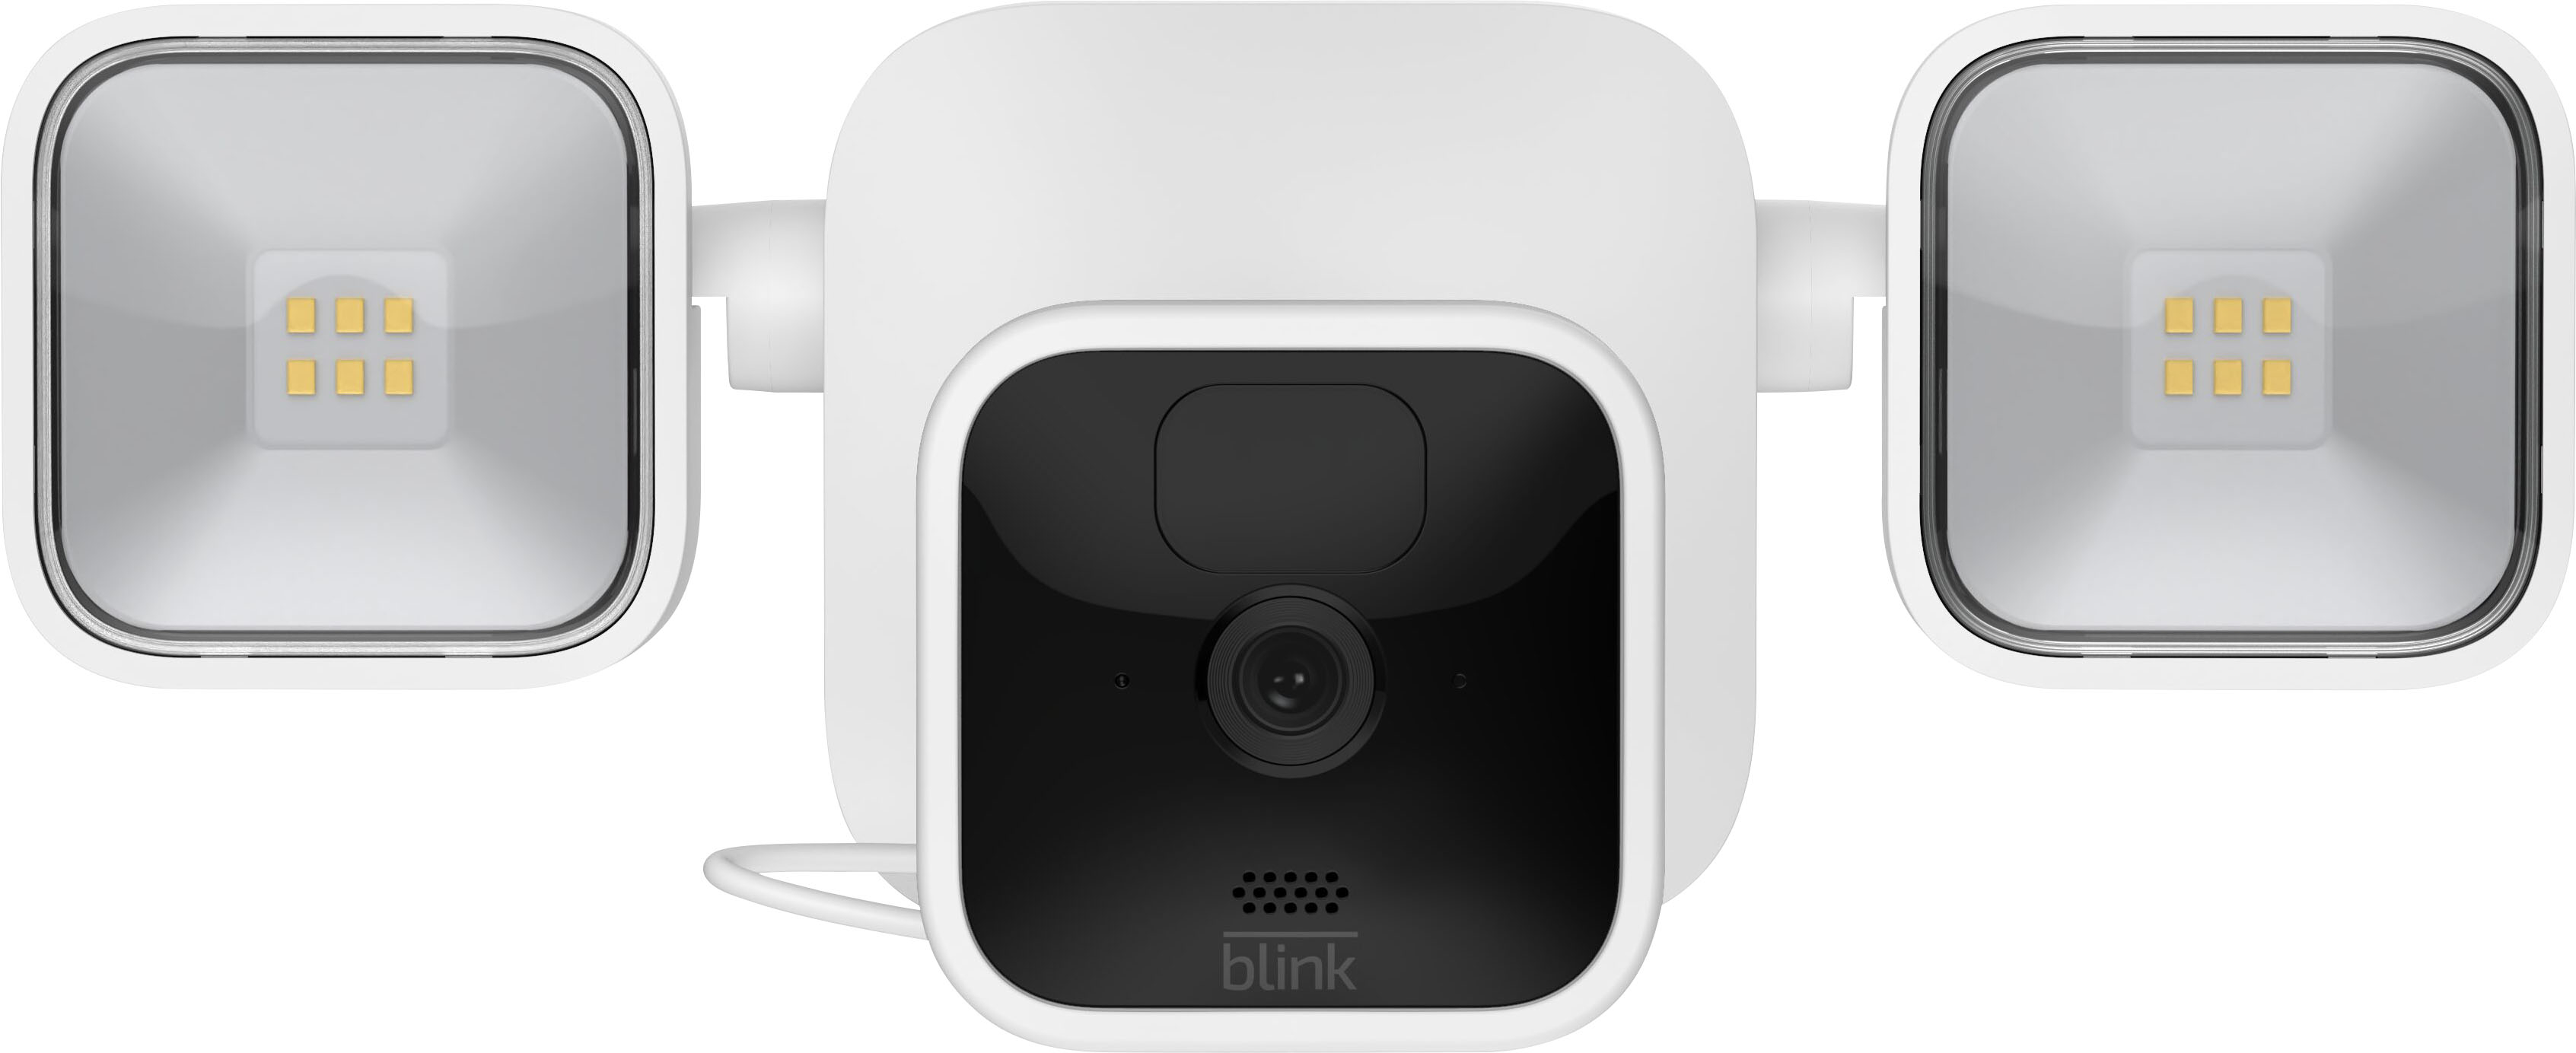 Blink Wireless Hd Smart Security Camera And Floodlight